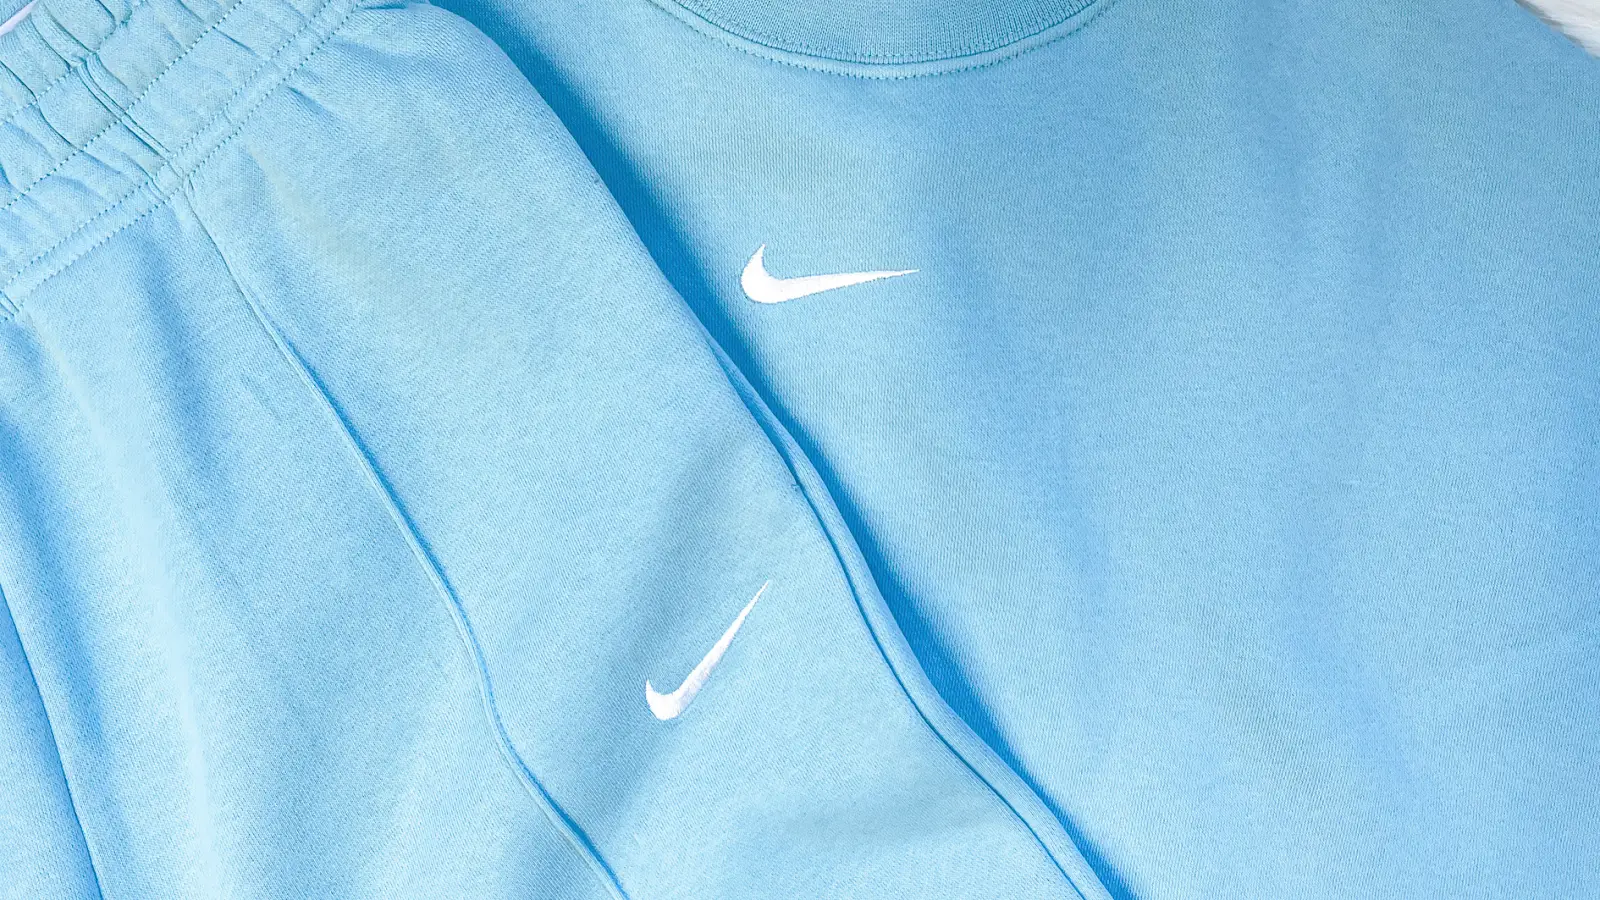 Nike's New-Season Clothing is the Hottest Drop Yet | The Sole Supplier